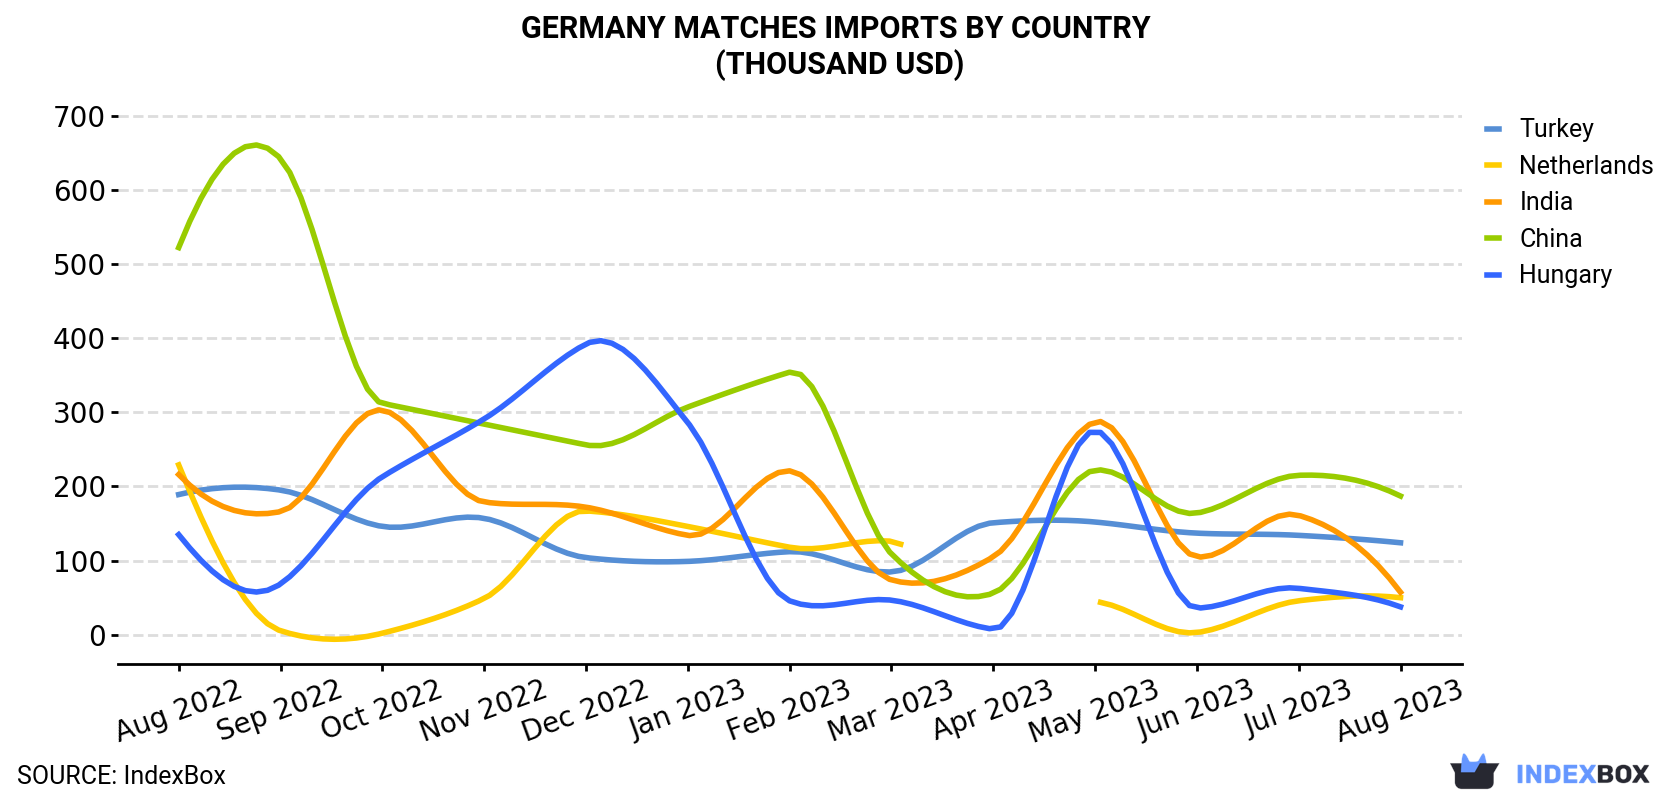 Germany Matches Imports By Country (Thousand USD)